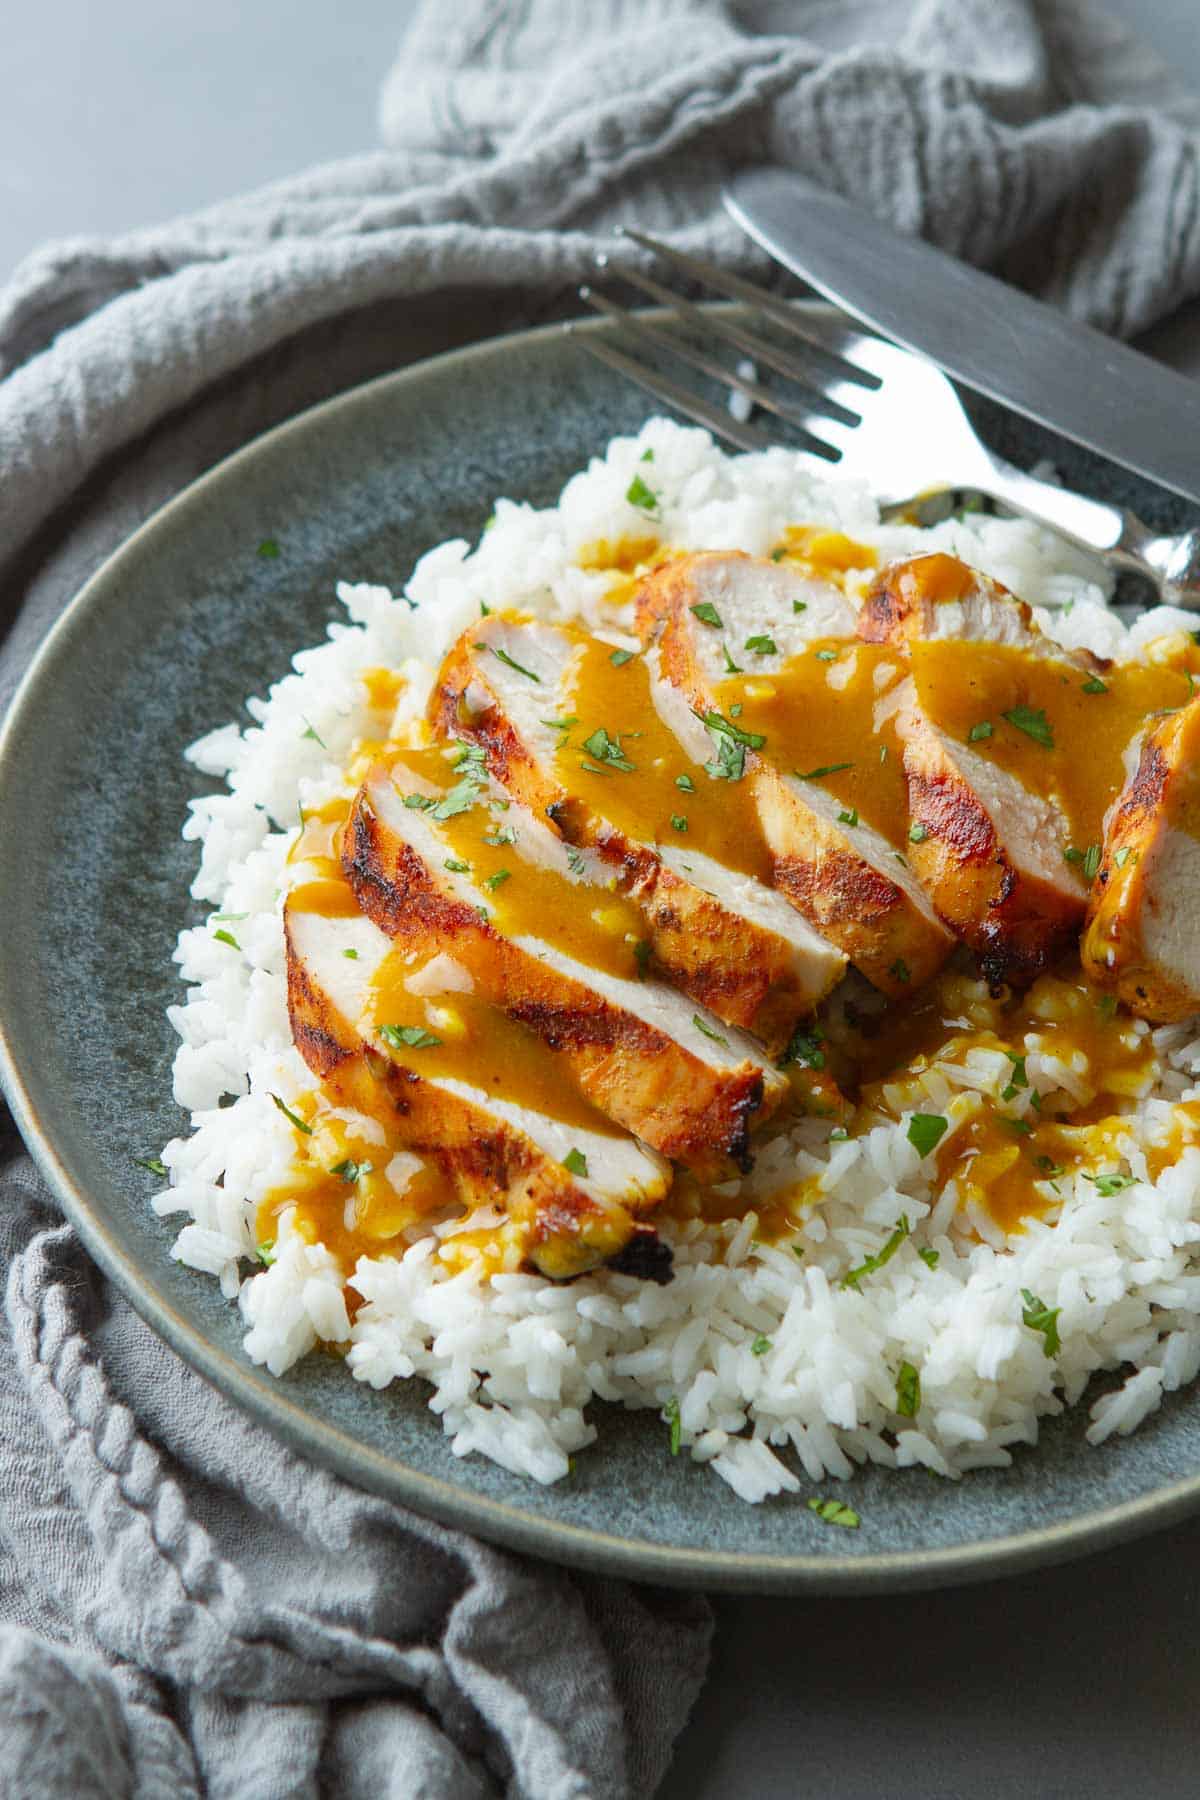 Slices of grilled chicken, topped with a curry sauce, on rice.